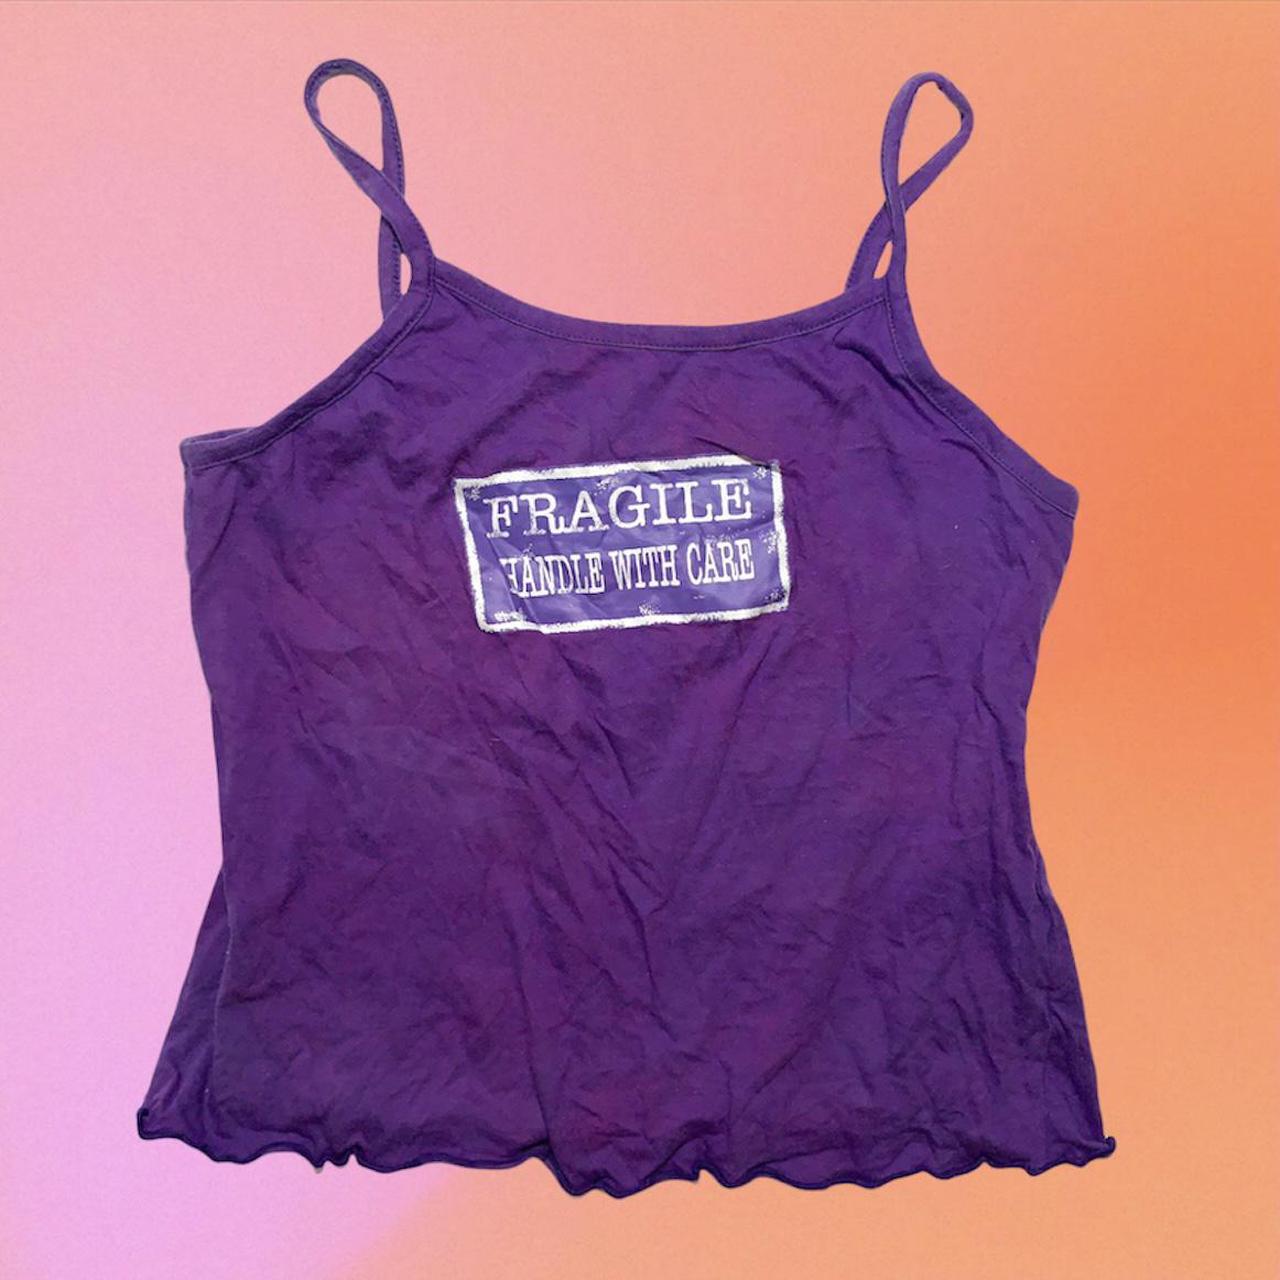 Strappy Purple Vest Top With Cheeky Motif And Depop